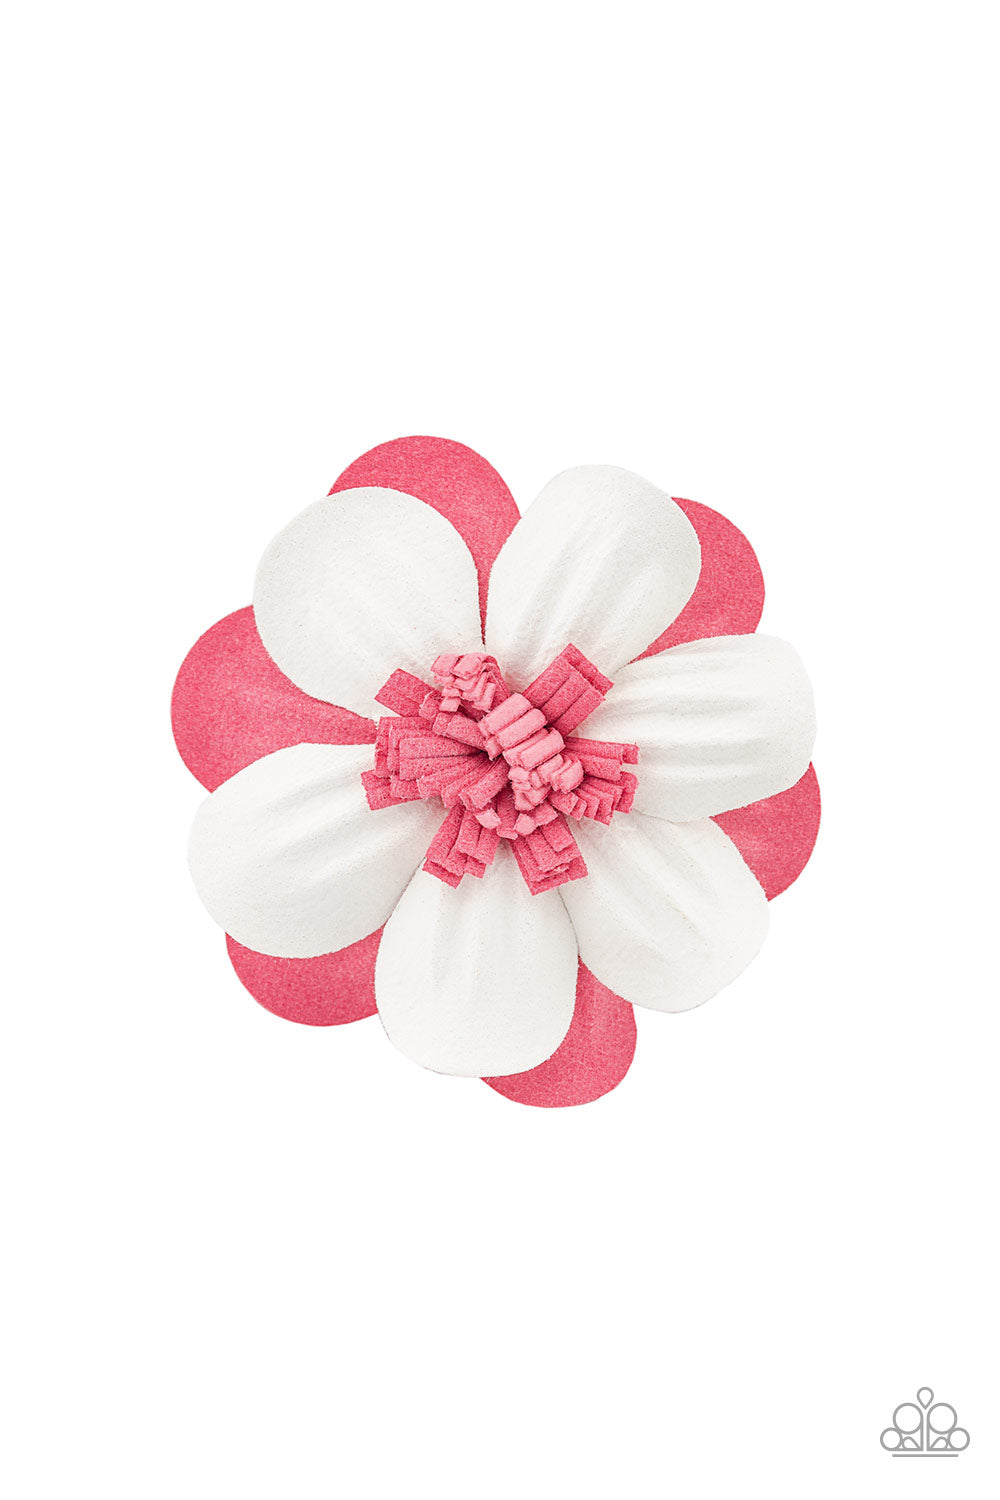 Merry Magnolia__Hair Accessories__Pink